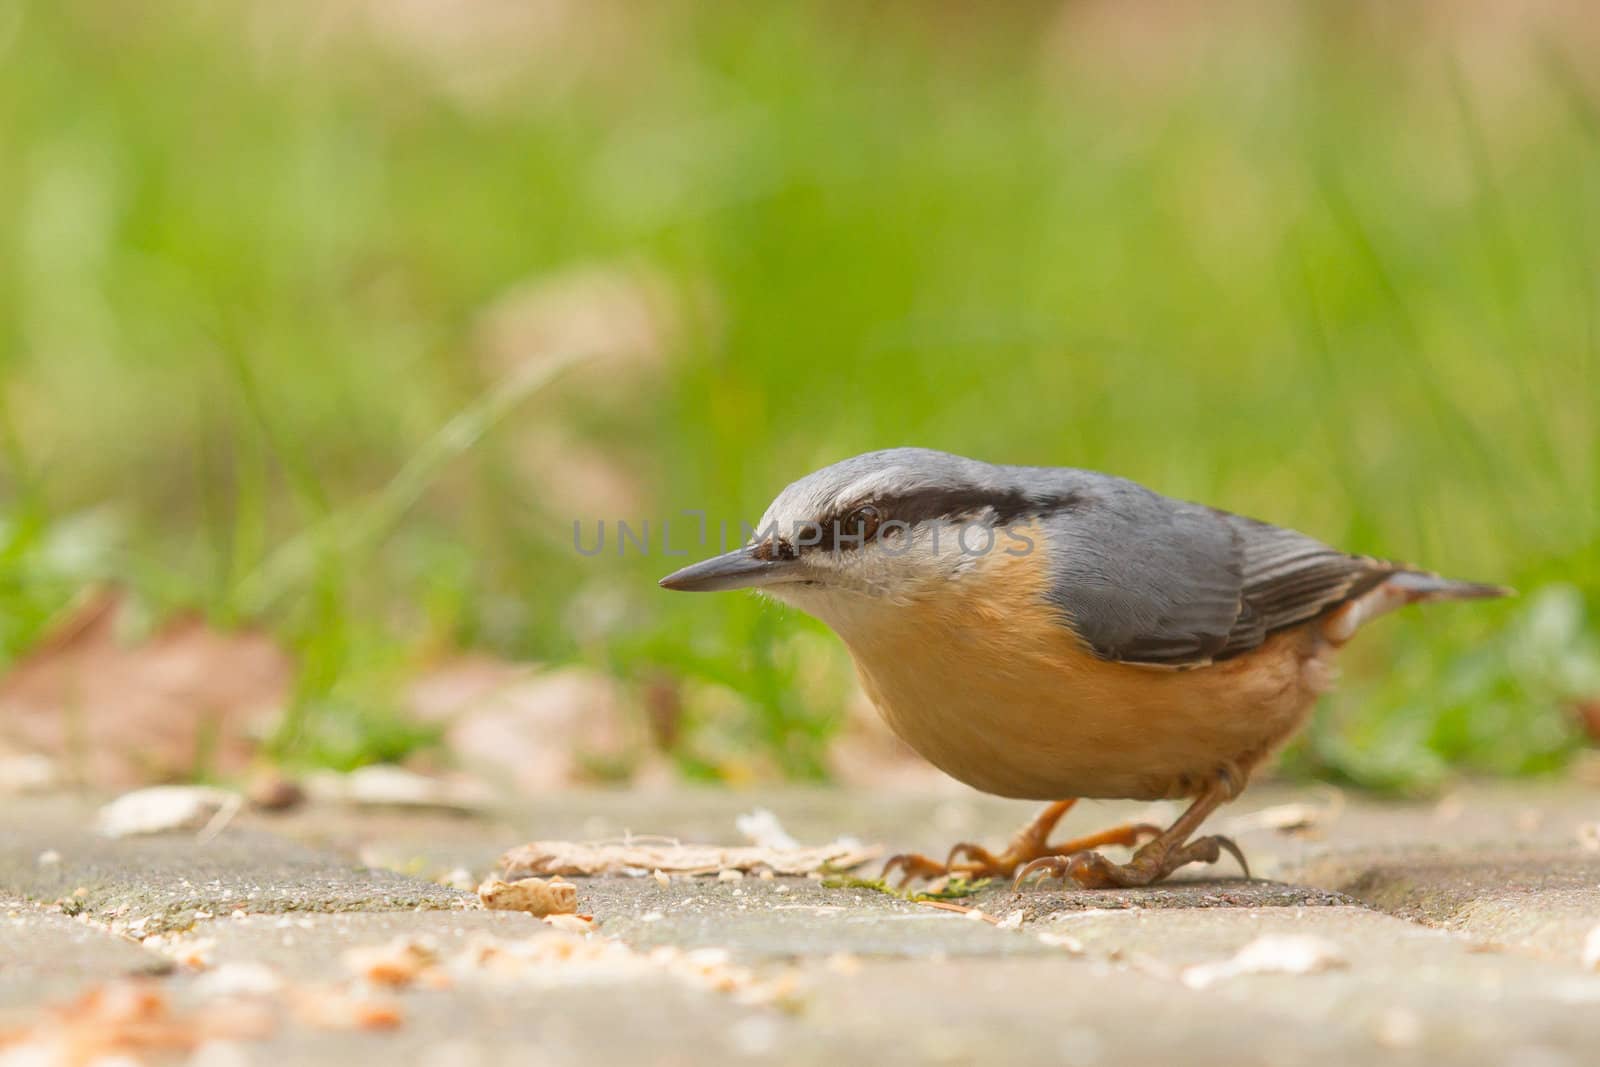 A Nuthatch on the ground by michaklootwijk